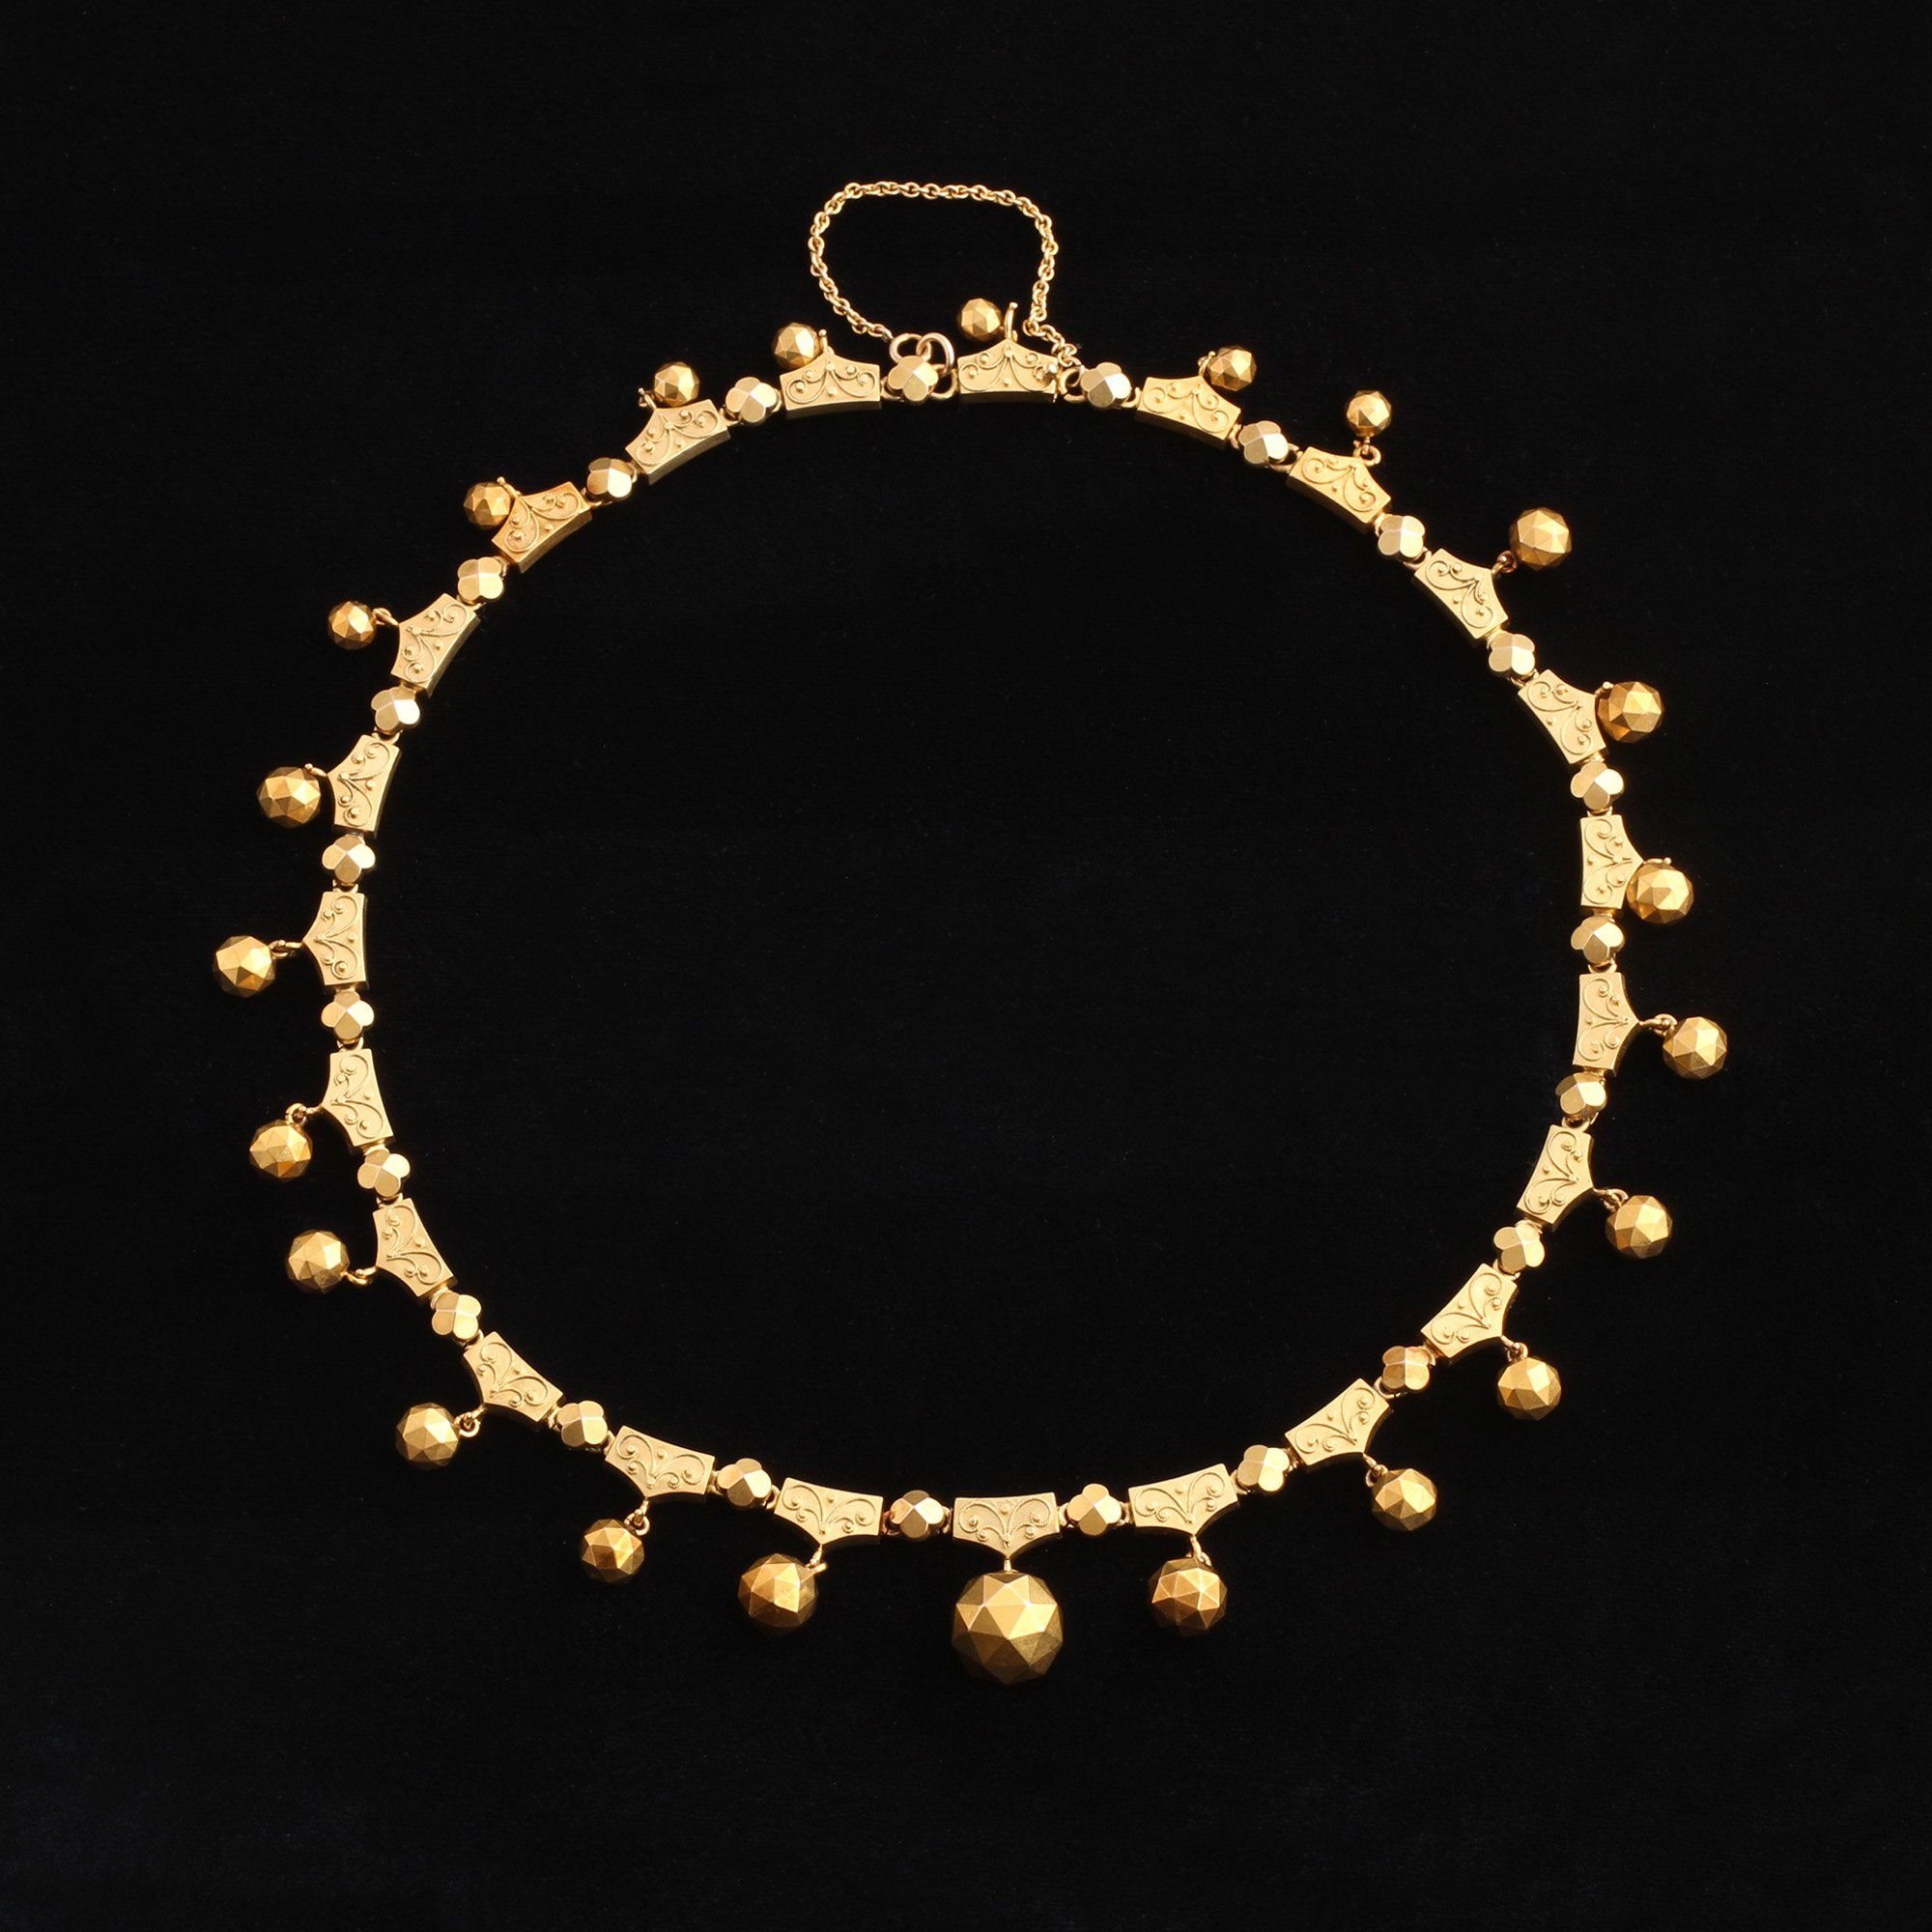 Victorian Faceted Spheres Necklace